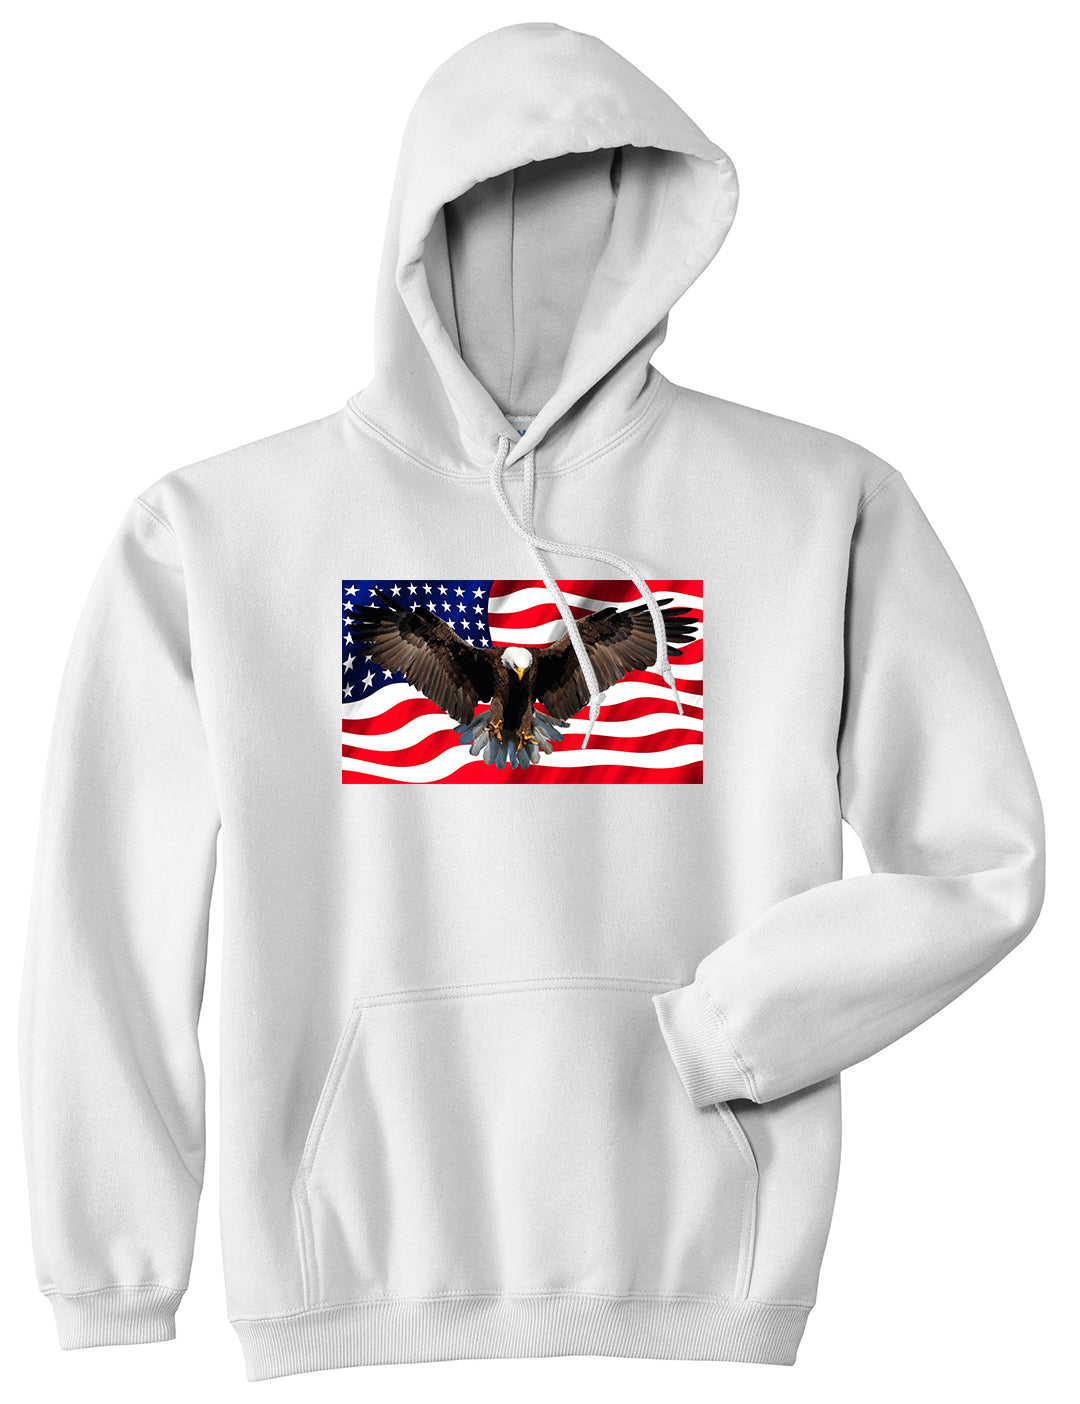 Bald Eagle American Flag White Pullover Hoodie by Kings Of NY